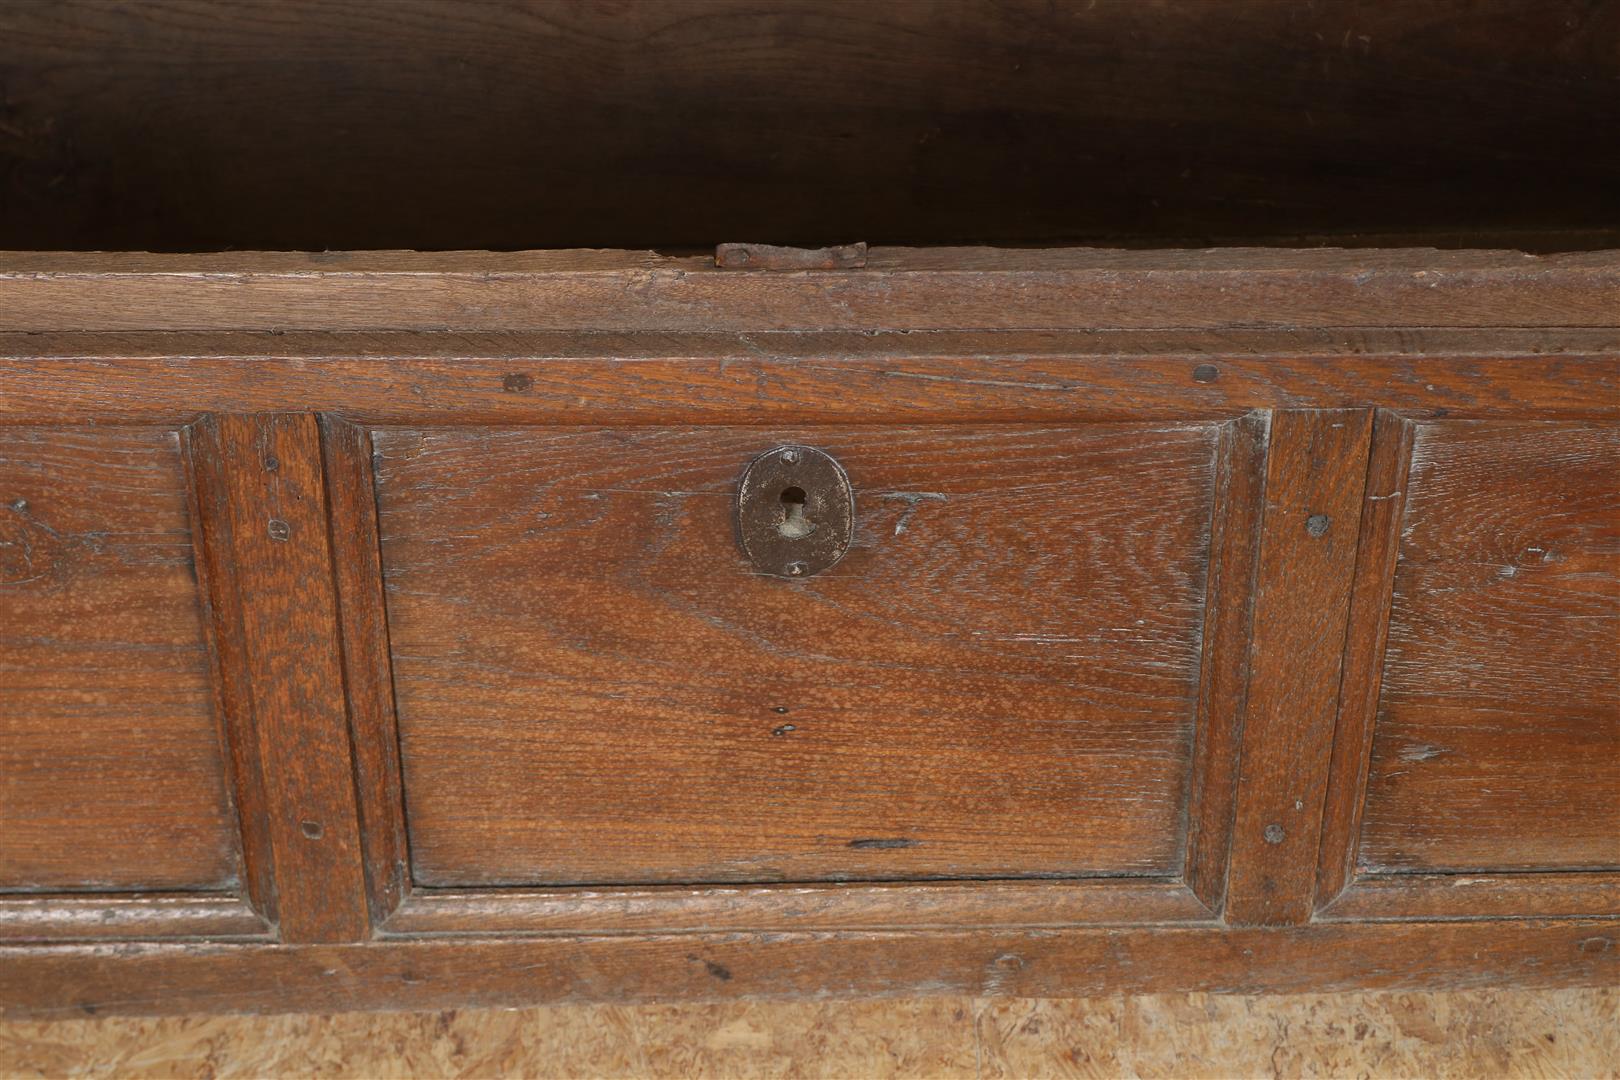 Oak blanket chest with 3 front panels, resting cap, struts, 18th century, 47 x 128 x 55 cm. - Image 3 of 4